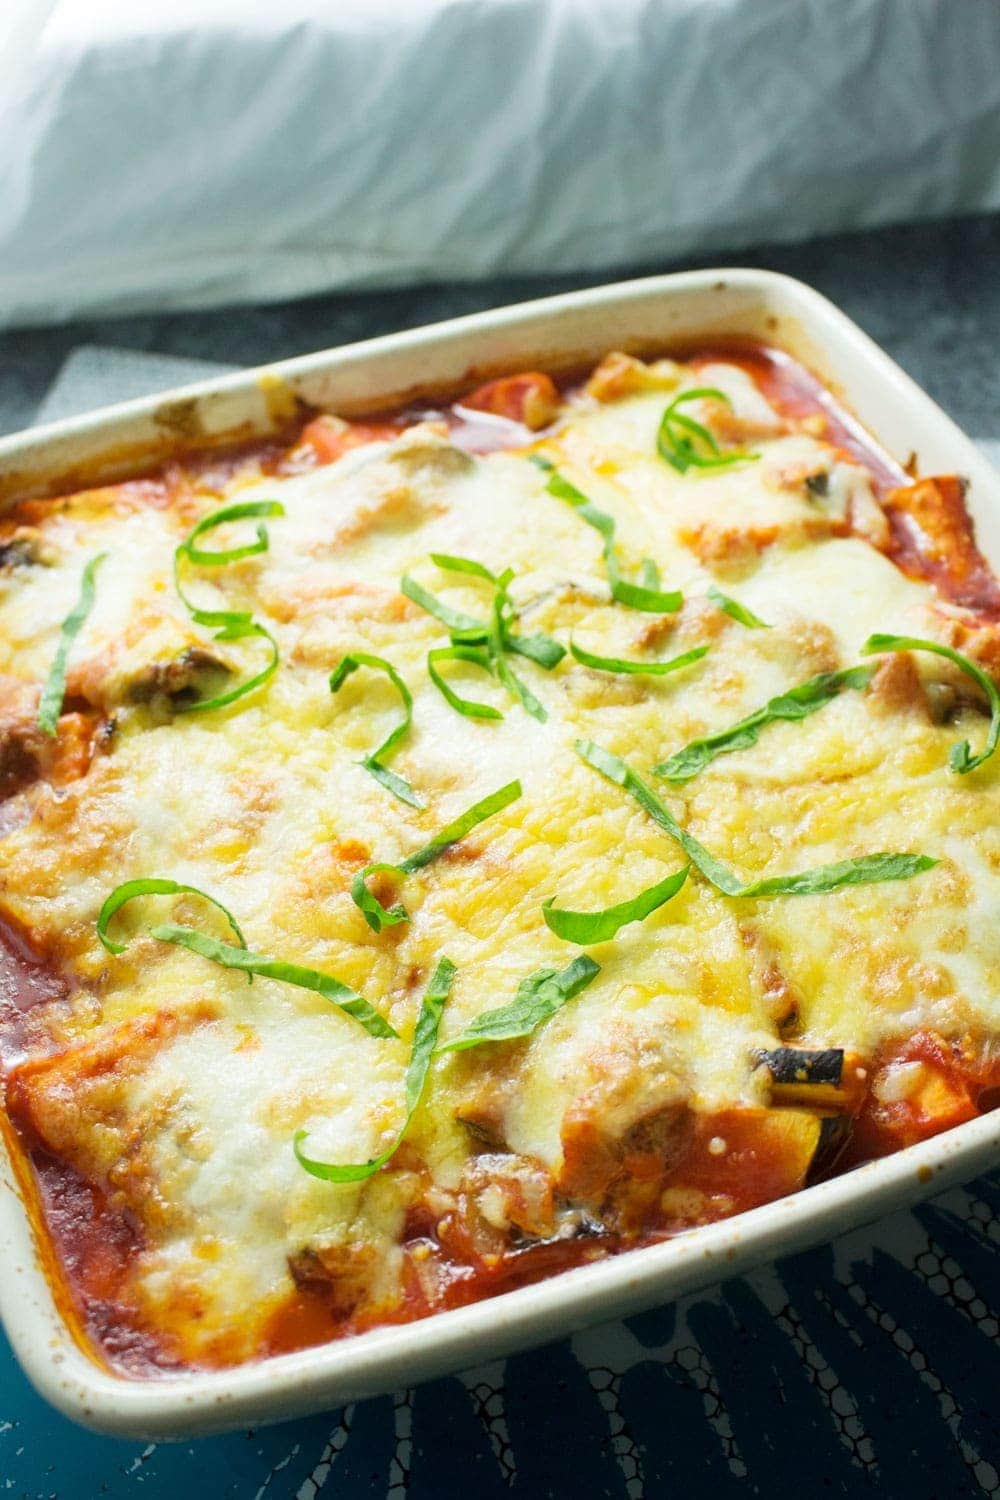 This cheesy veggie pesto polenta bake will keep you warm in winter! Bursting with veg & guaranteed to fill you up, this is the perfect vegetarian dinner.